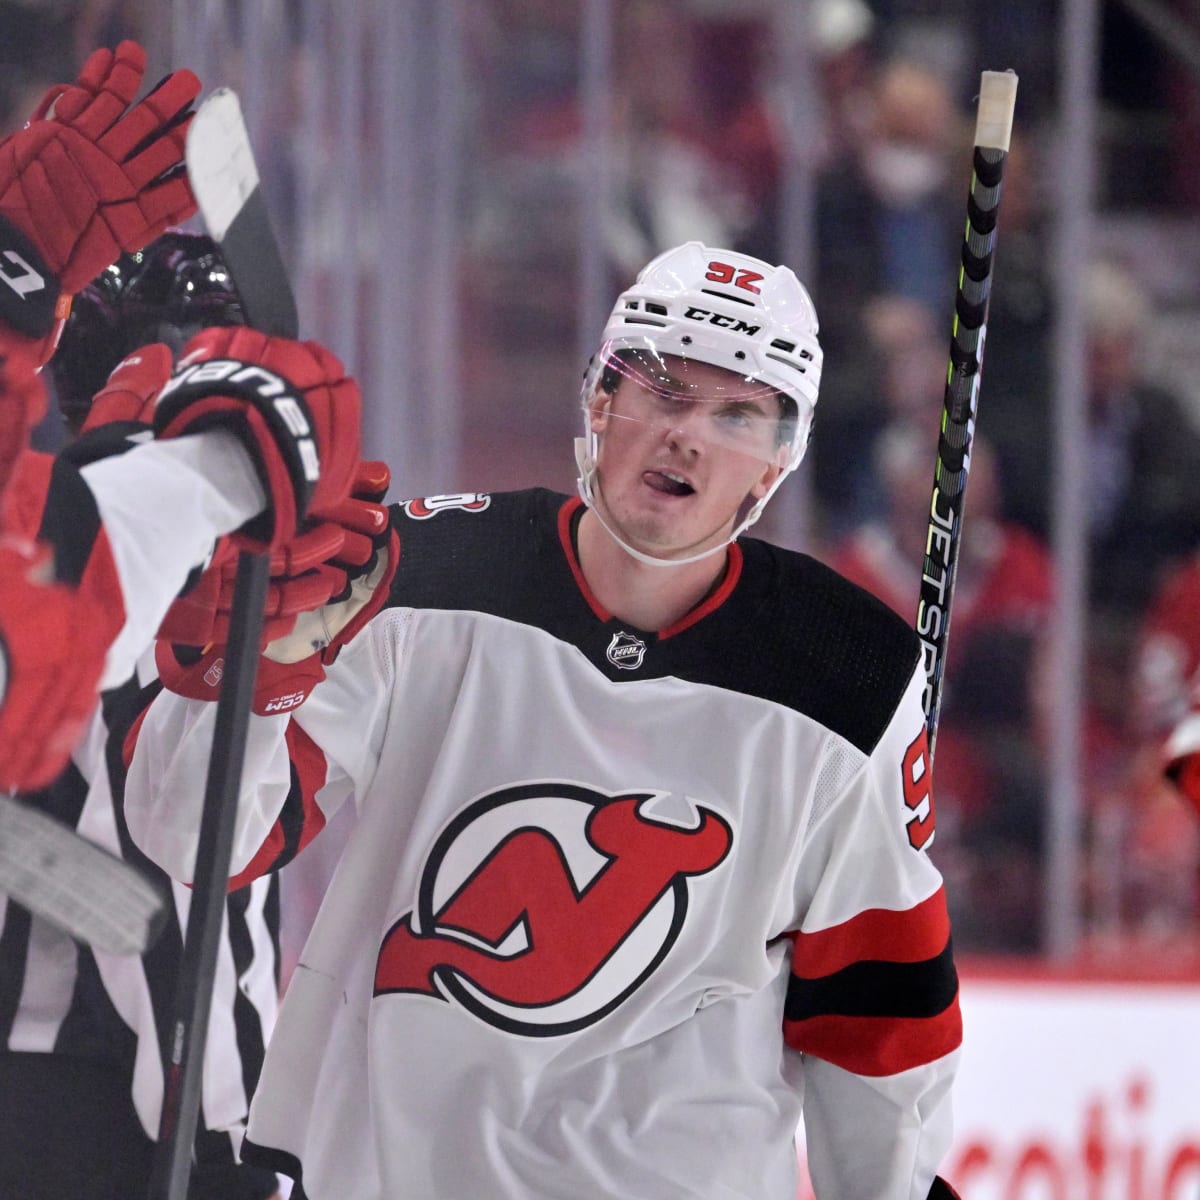 Game Preview: New Jersey Devils at Buffalo Sabres - All About The